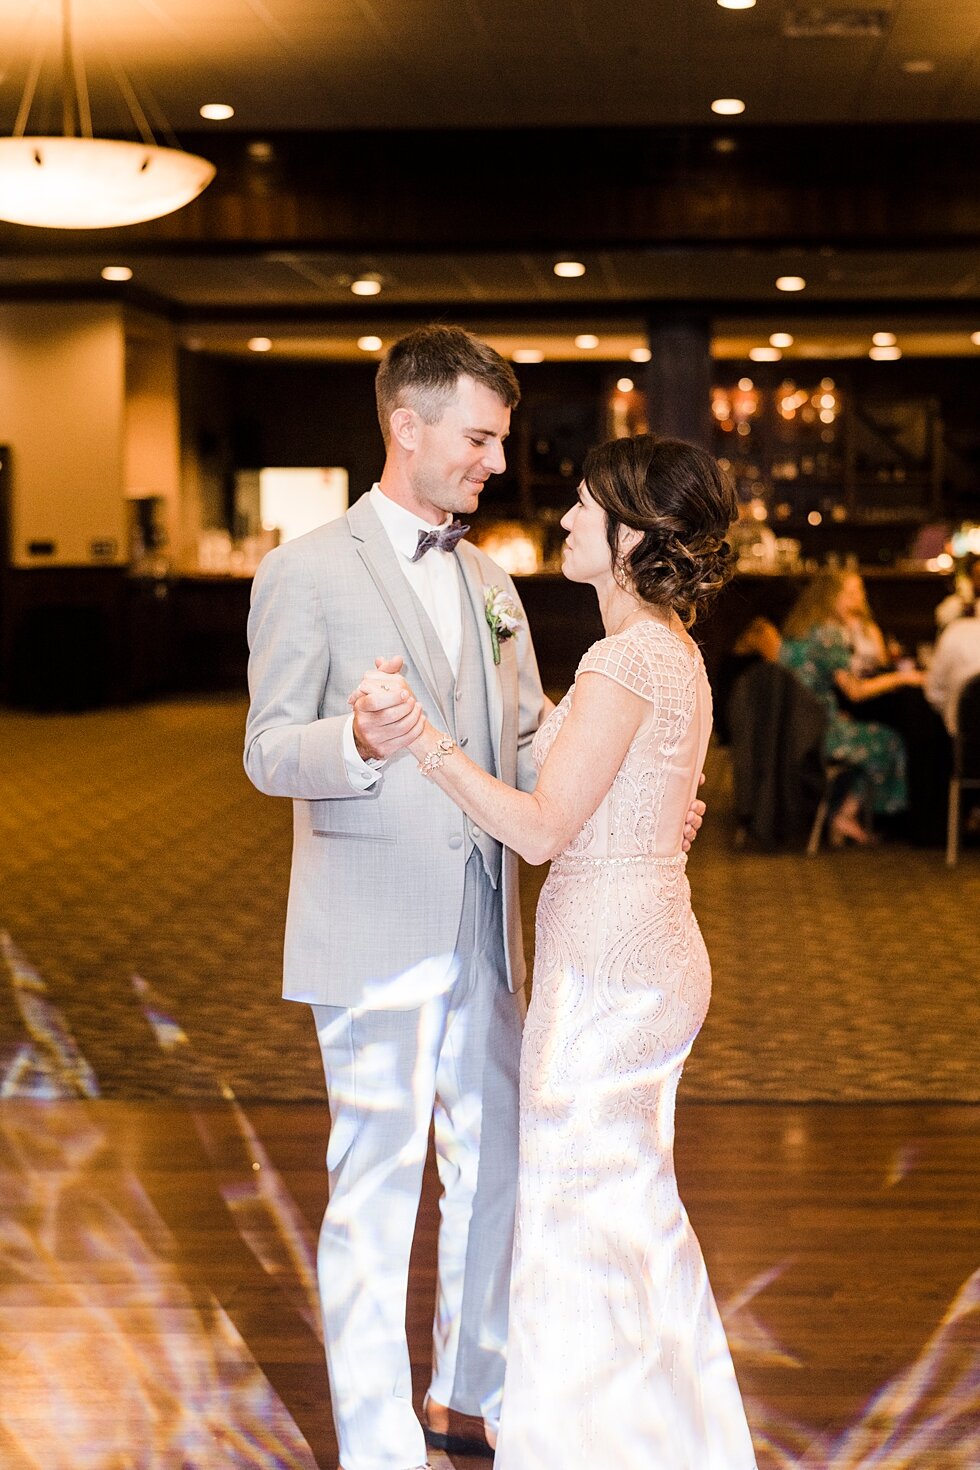  Dancing together as mother and son during this wedding venue. wedding ceremony details stunning photography married midwest louisville kentucky #weddingphoto #love #justmarried #midwestphotographer #kywedding #louisville #kentuckywedding #auburnkywe